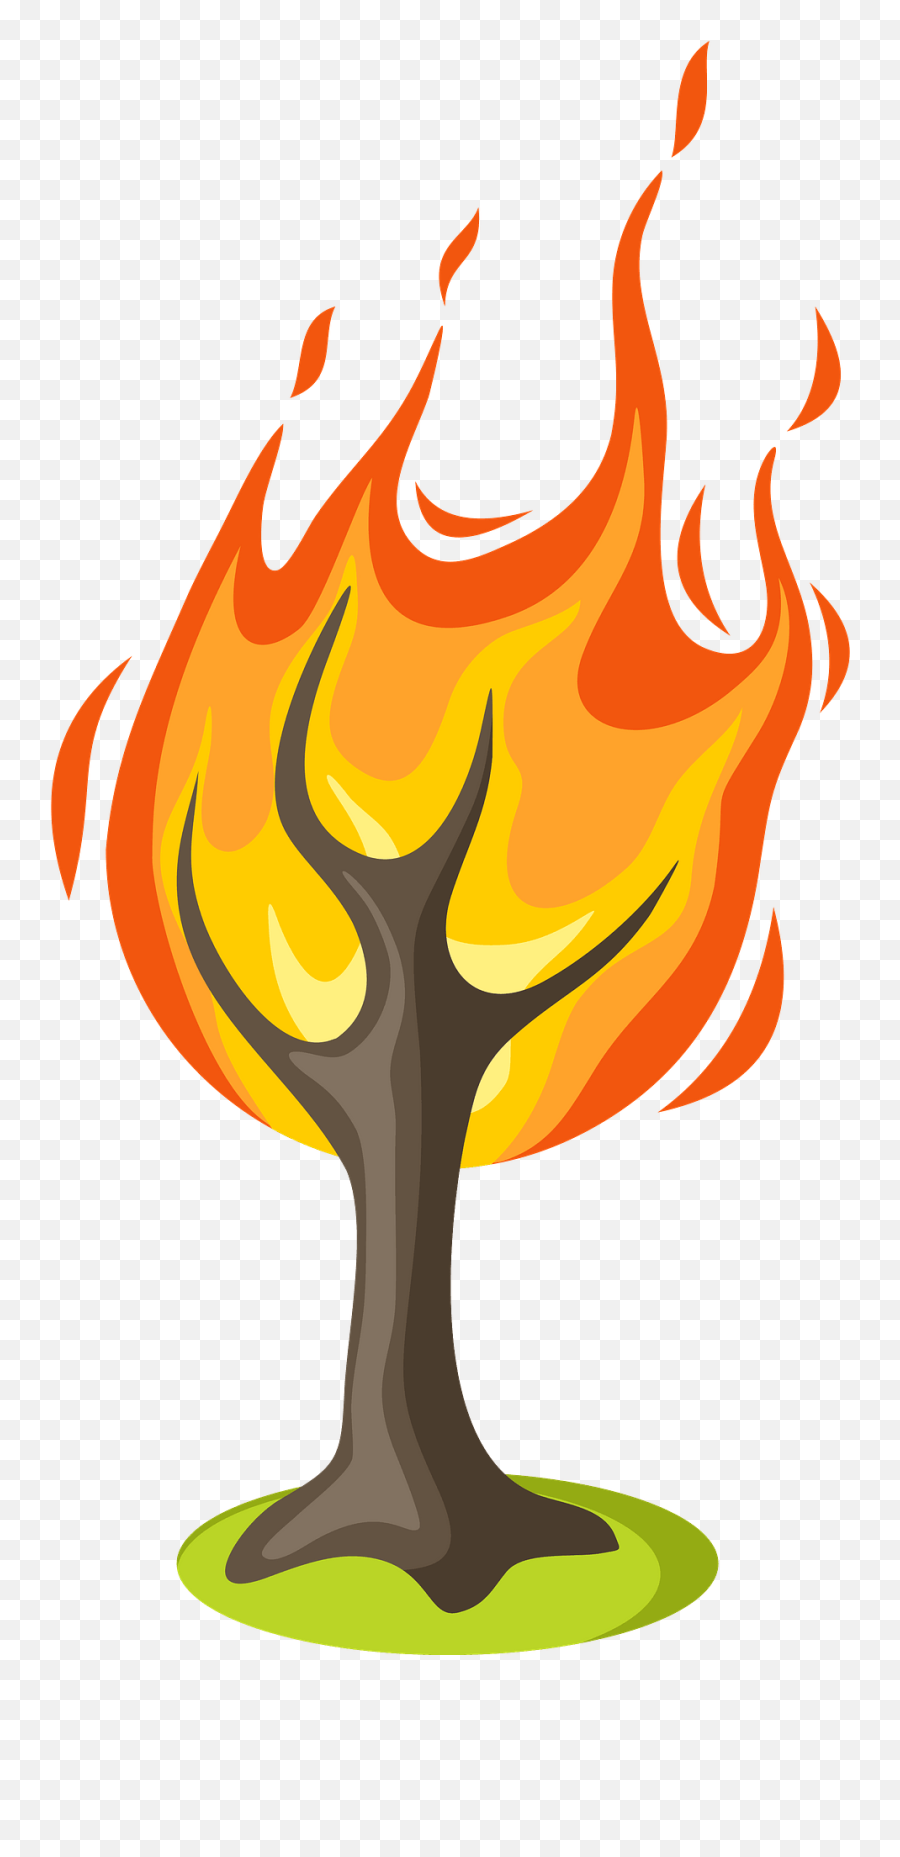 Burning Tree Clipart Free Download Transparent Png Creazilla - Transparent Tree On Fire Clipart Emoji,Fireplace Clipart